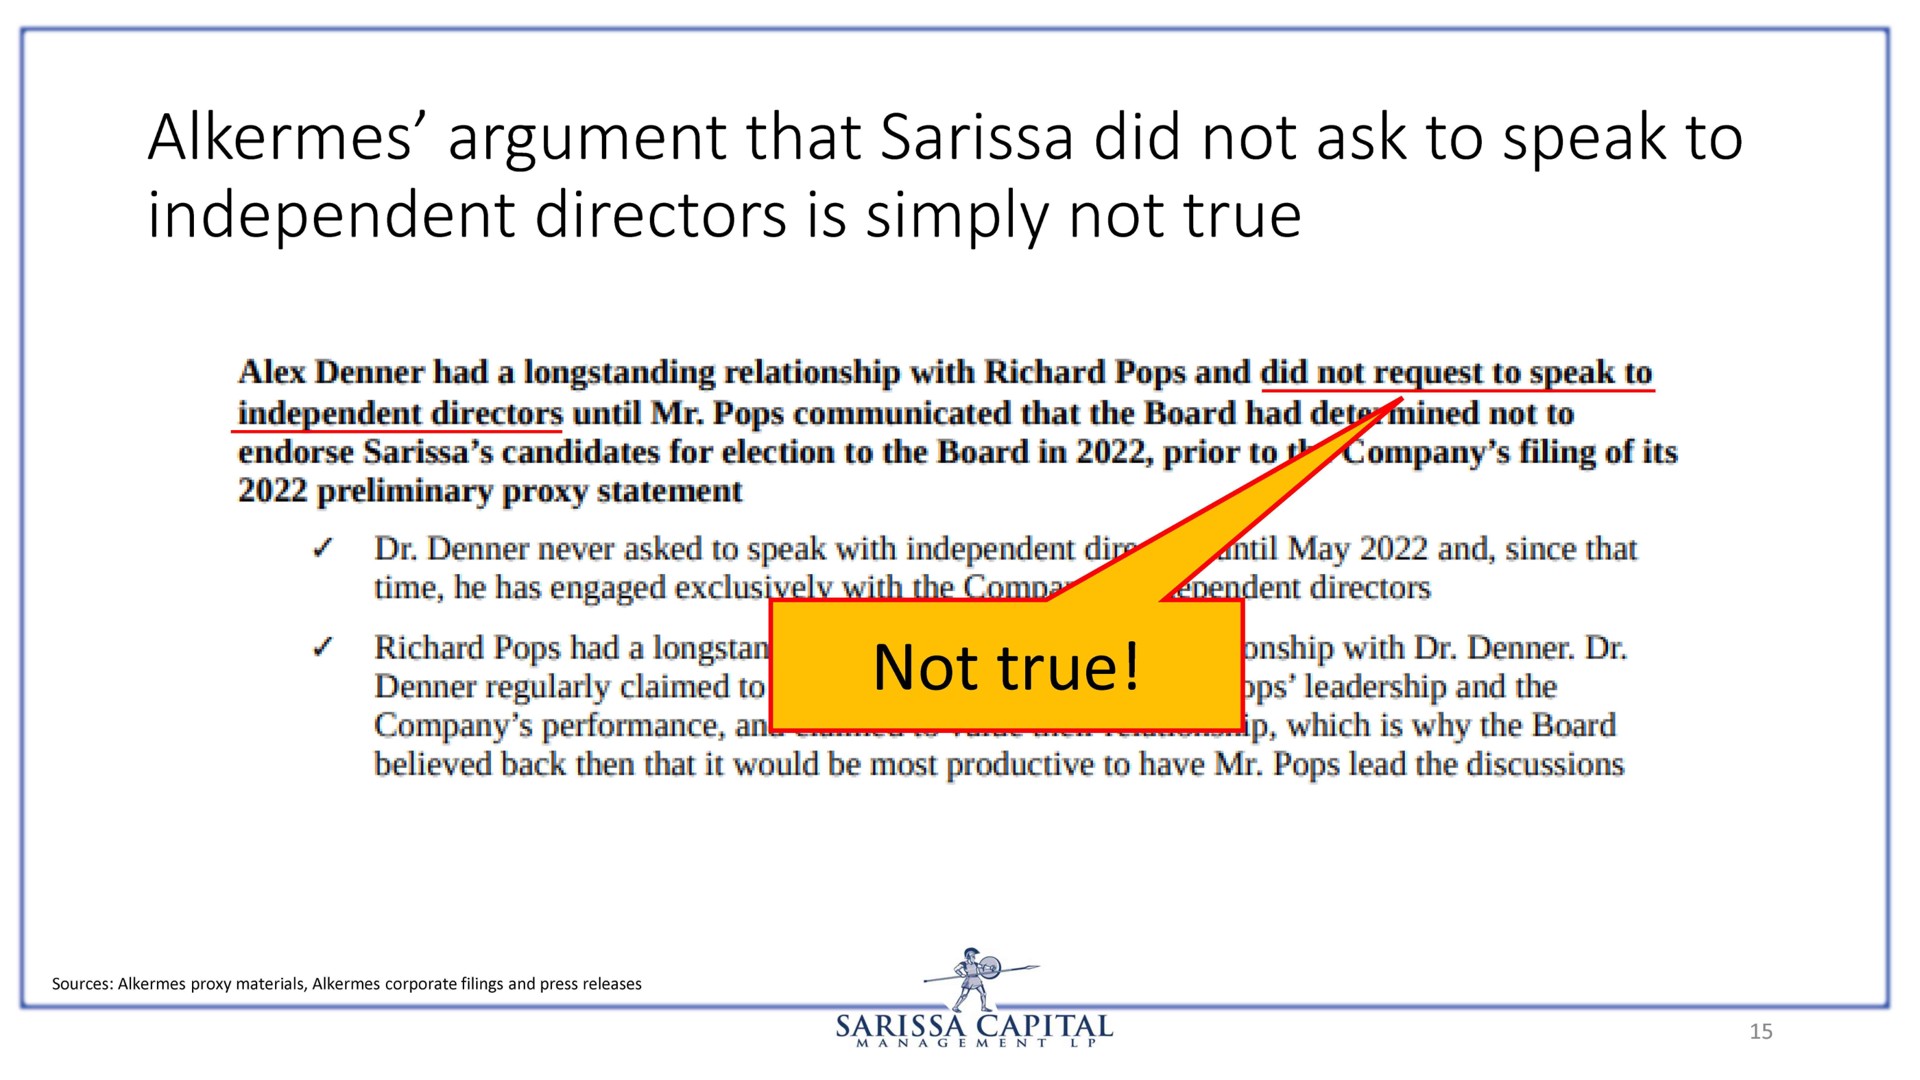 alkermes argument that did not ask to speak to independent directors is simply not true | Sarissa Capital